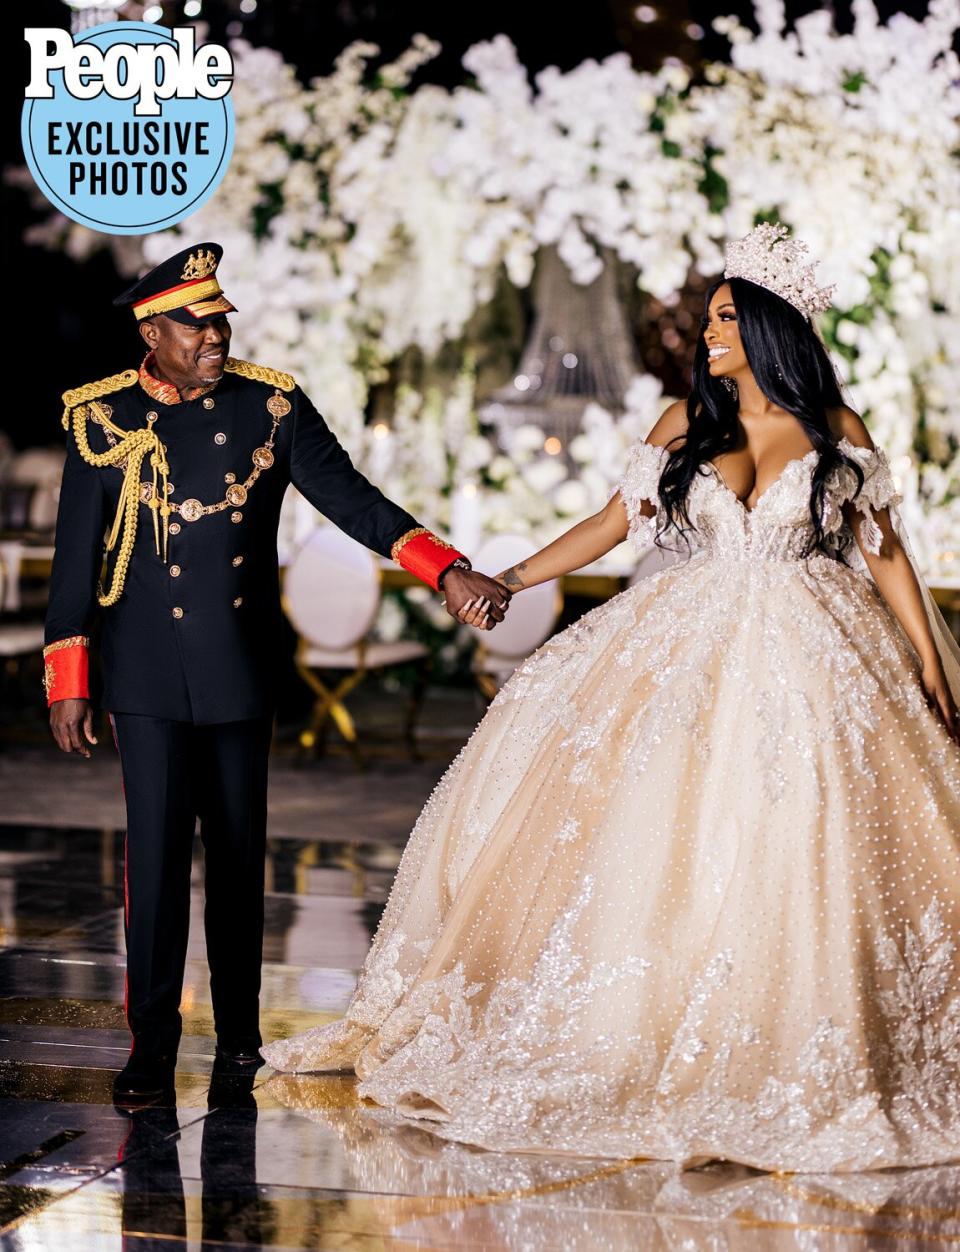 Porsha Williams and Simon Guobadia Wed — Again! — In American Ceremony https://gallery.stanlophotography.com/Client-Downloads/Porsha-Simon-Wedding/ Credit: @stanlophotography